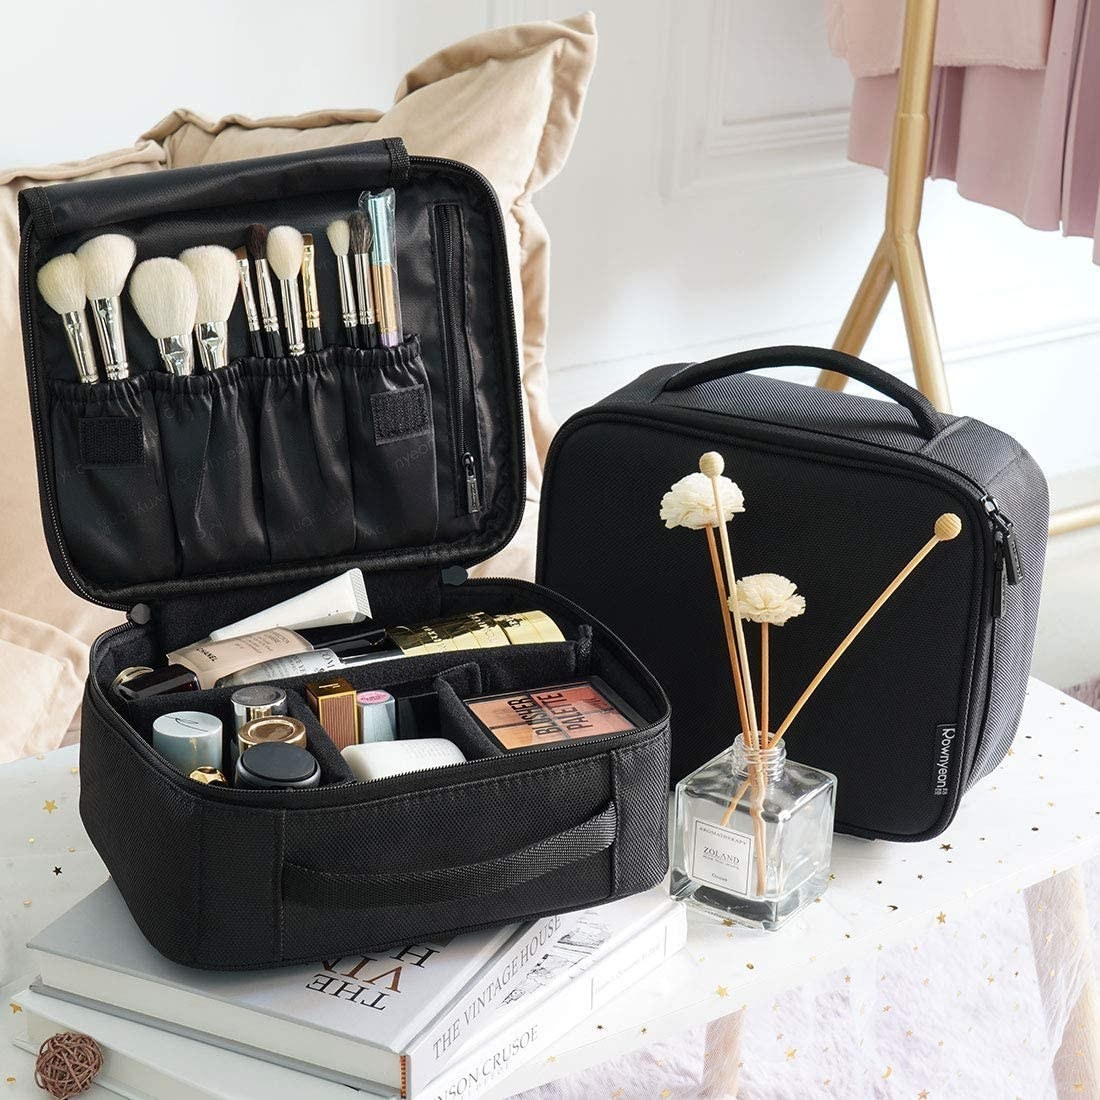 Two makeup cases on a table, one is open and filled with products